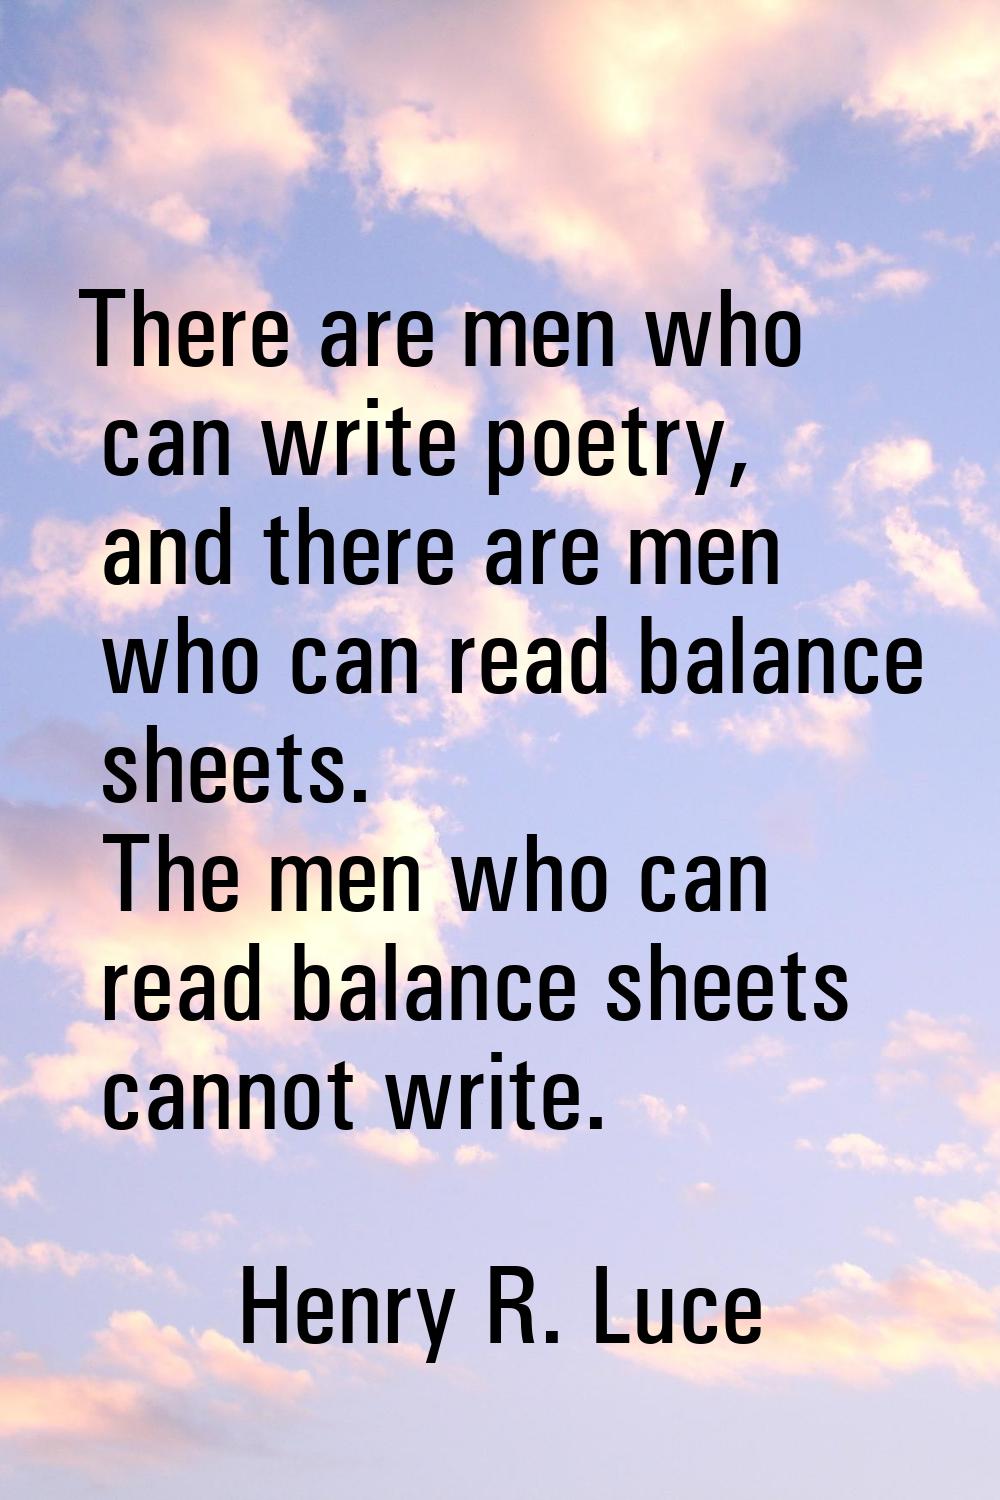 There are men who can write poetry, and there are men who can read balance sheets. The men who can 